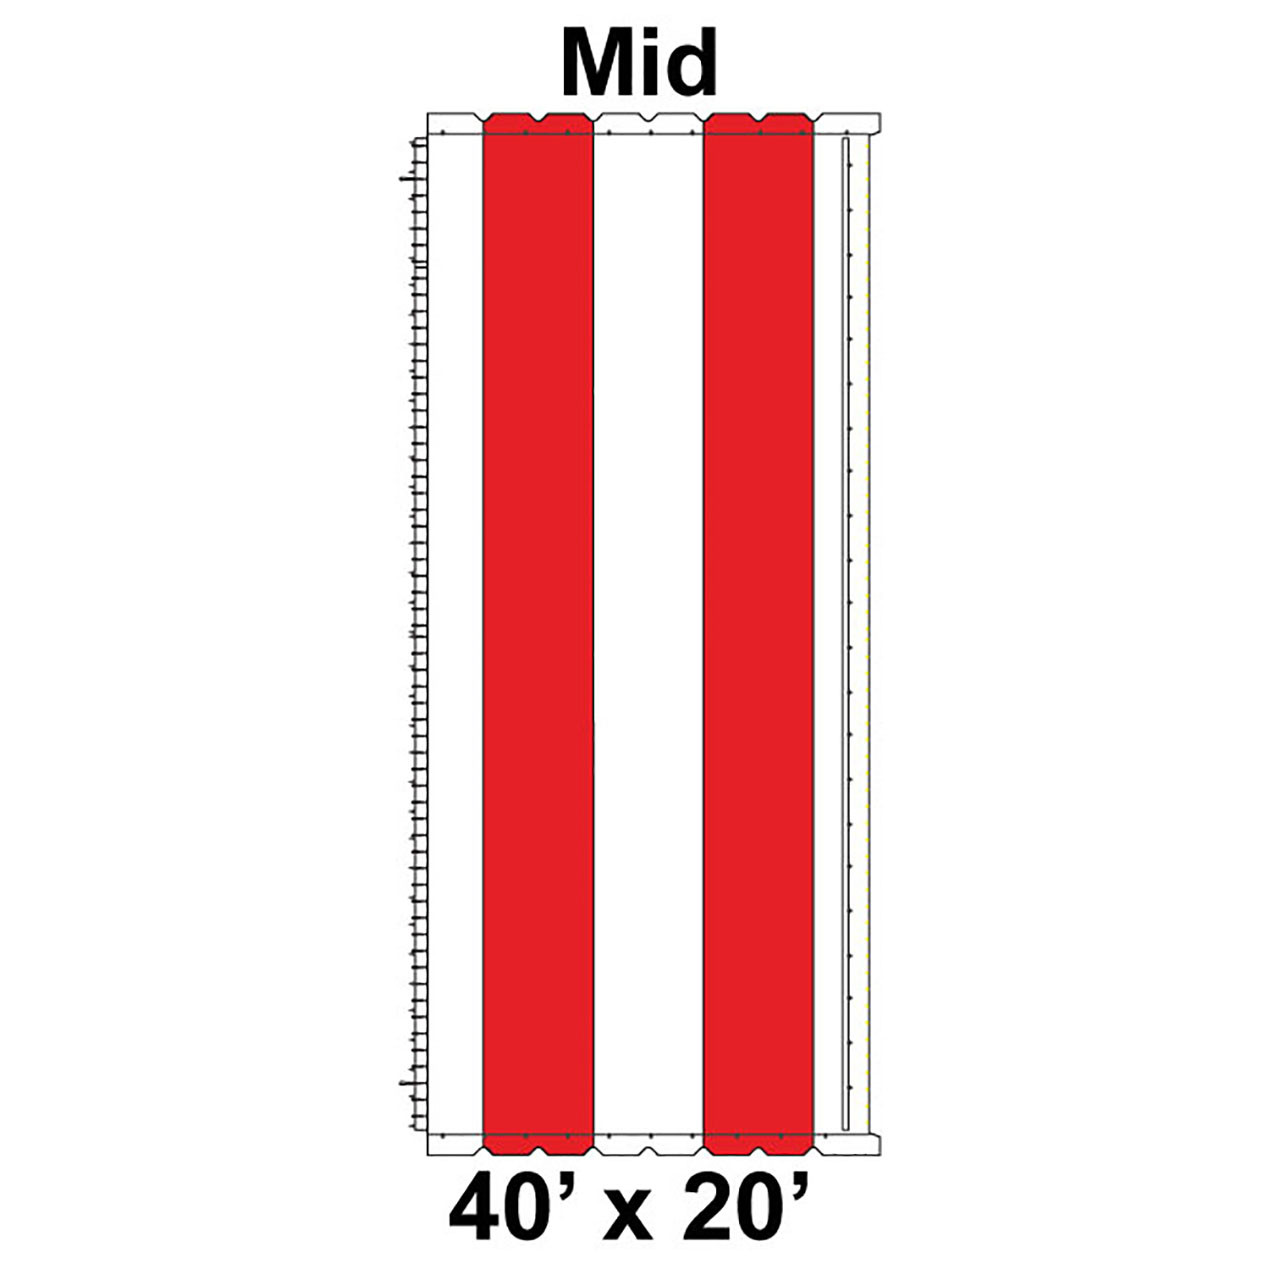 40' x 20' Classic Pole Tent Top, Mid Section